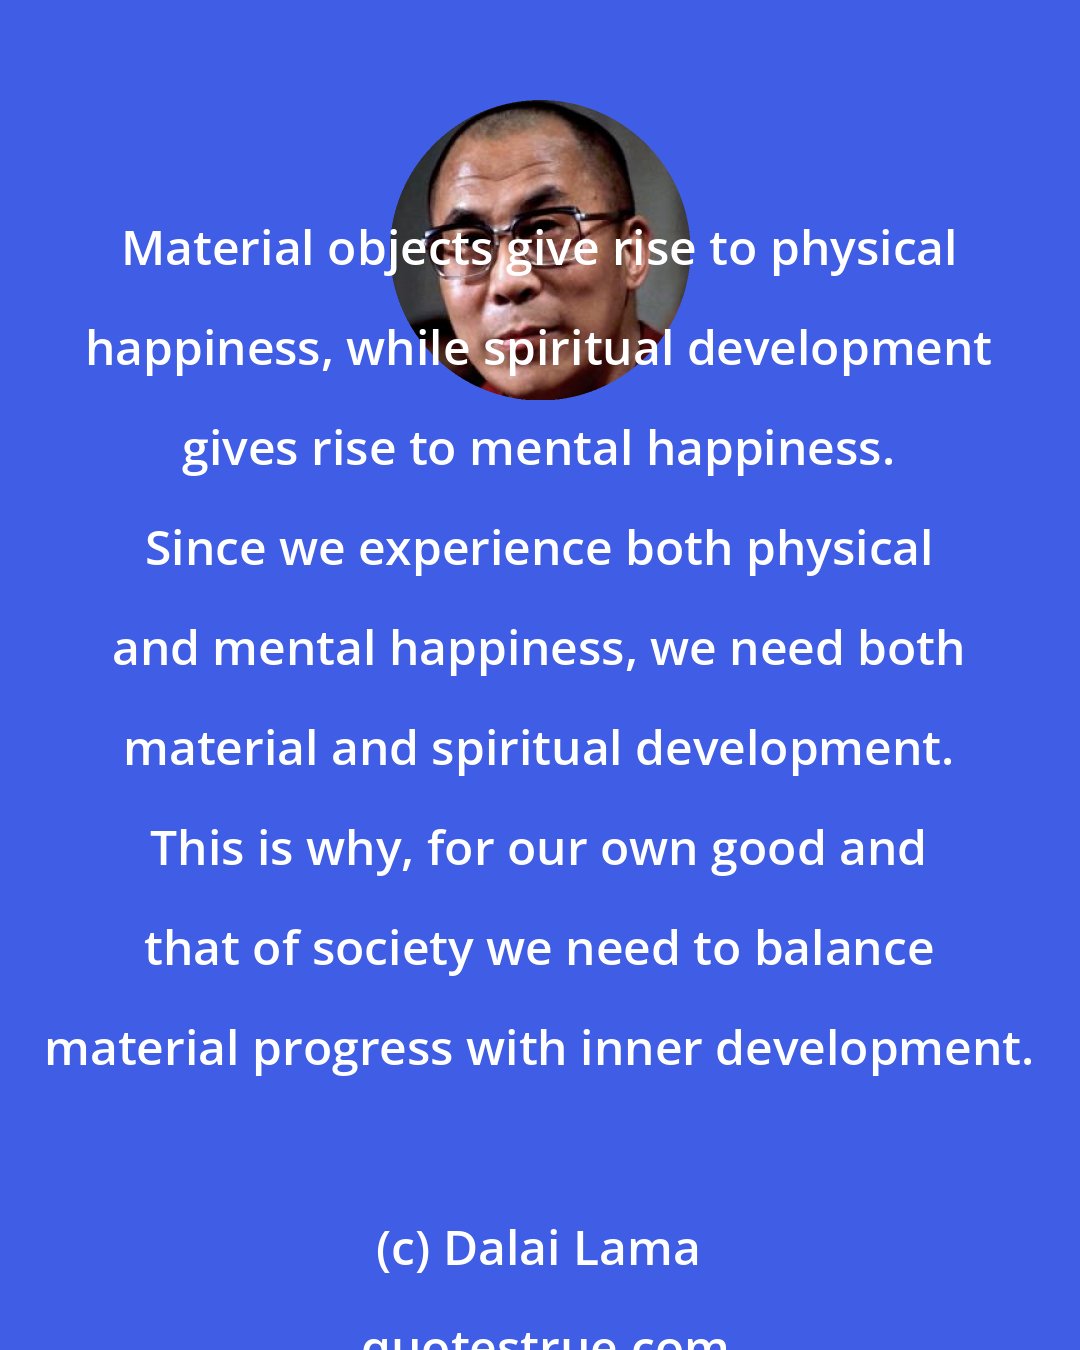 Dalai Lama: Material objects give rise to physical happiness, while spiritual development gives rise to mental happiness. Since we experience both physical and mental happiness, we need both material and spiritual development. This is why, for our own good and that of society we need to balance material progress with inner development.